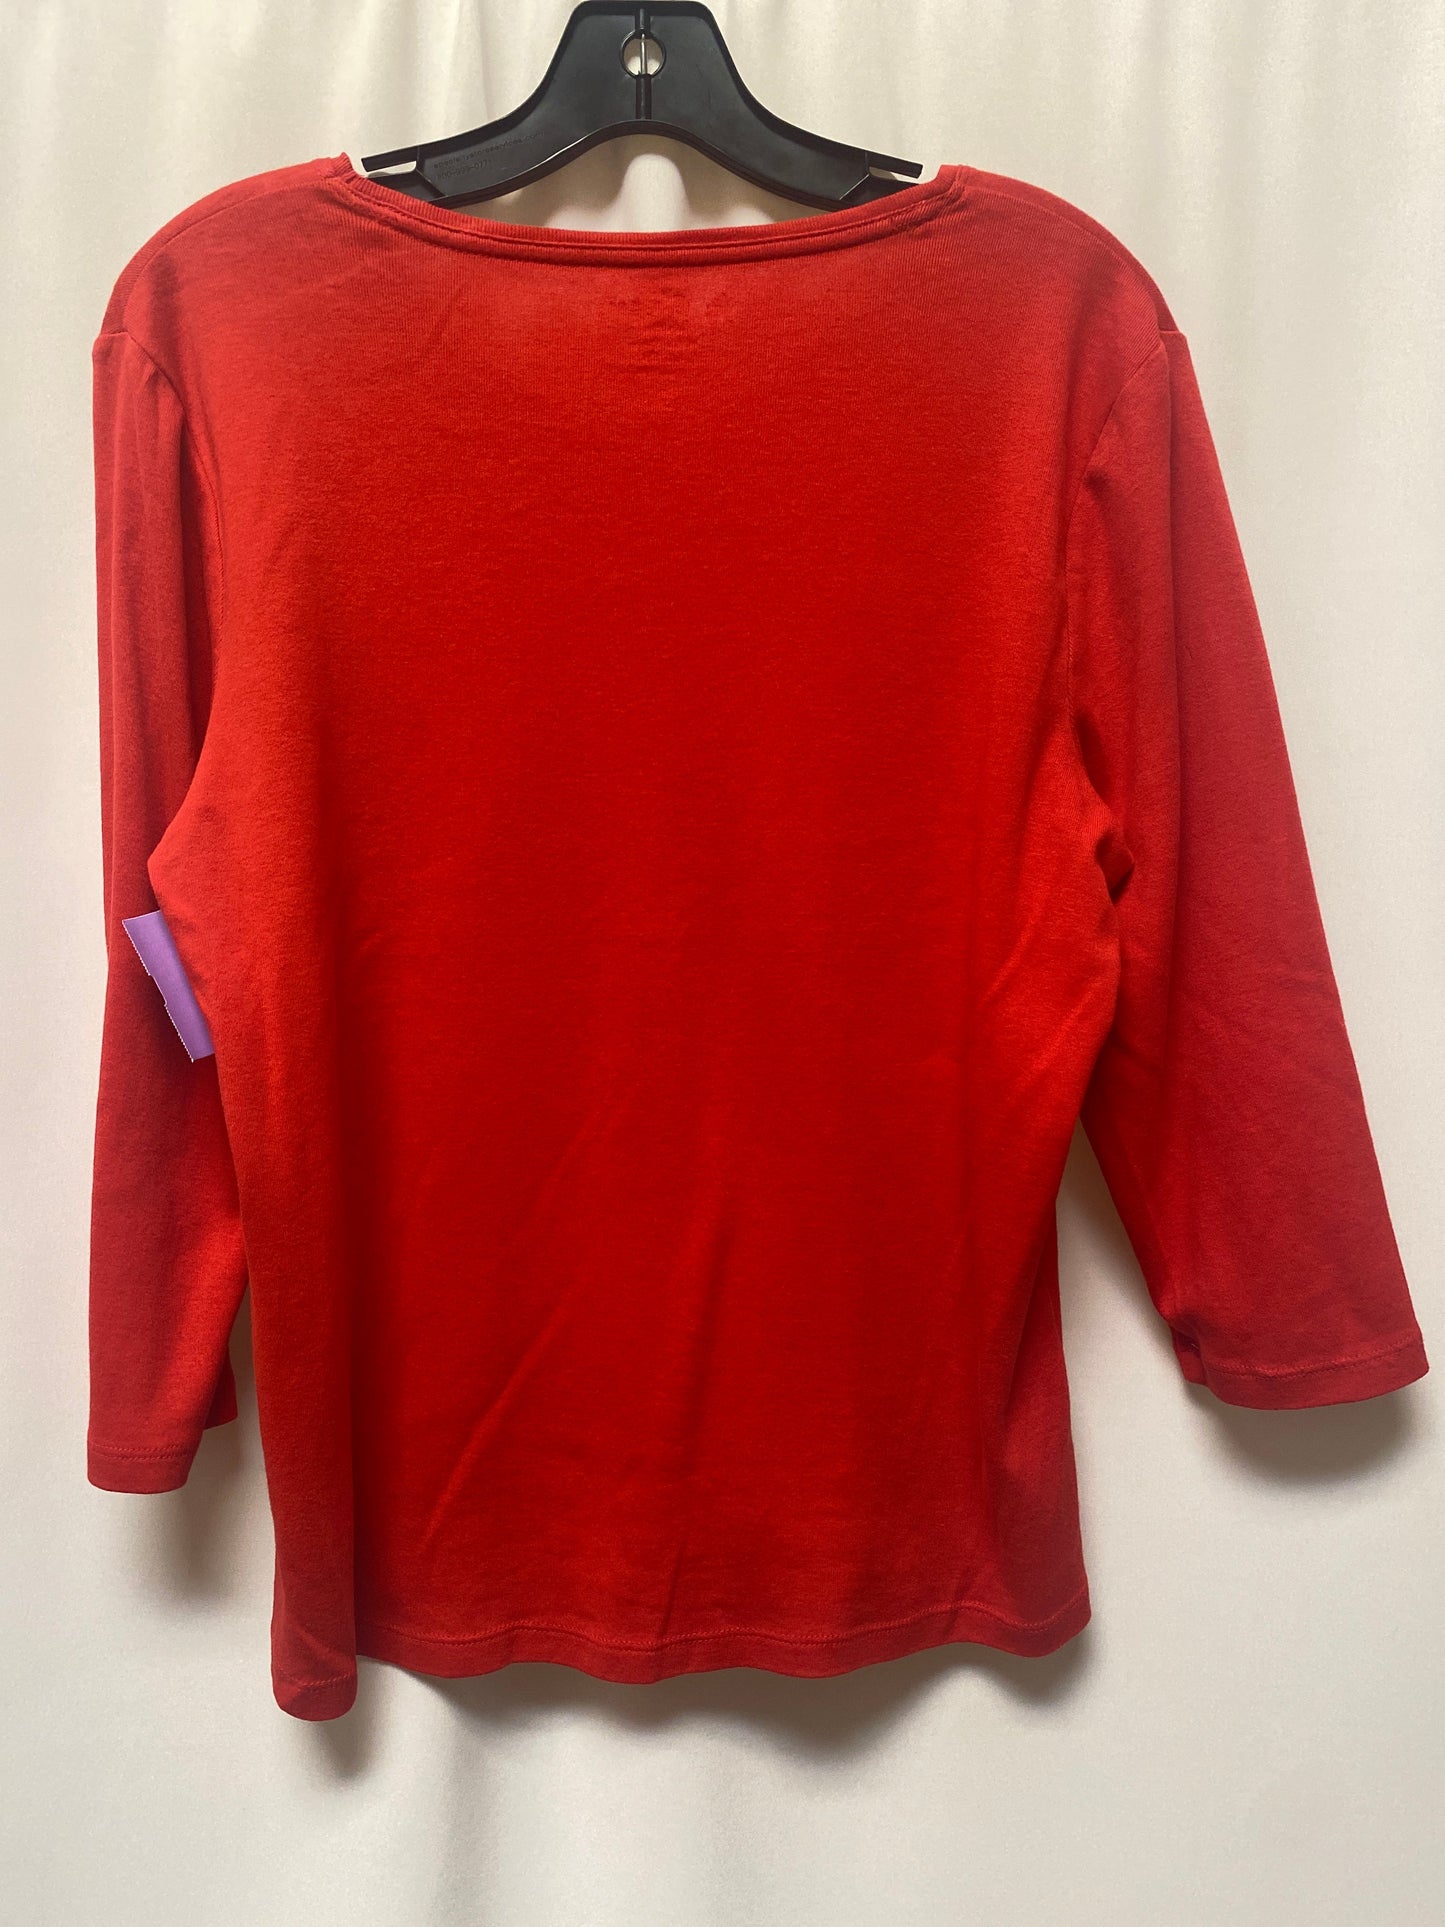 Red Top 3/4 Sleeve Chicos, Size L